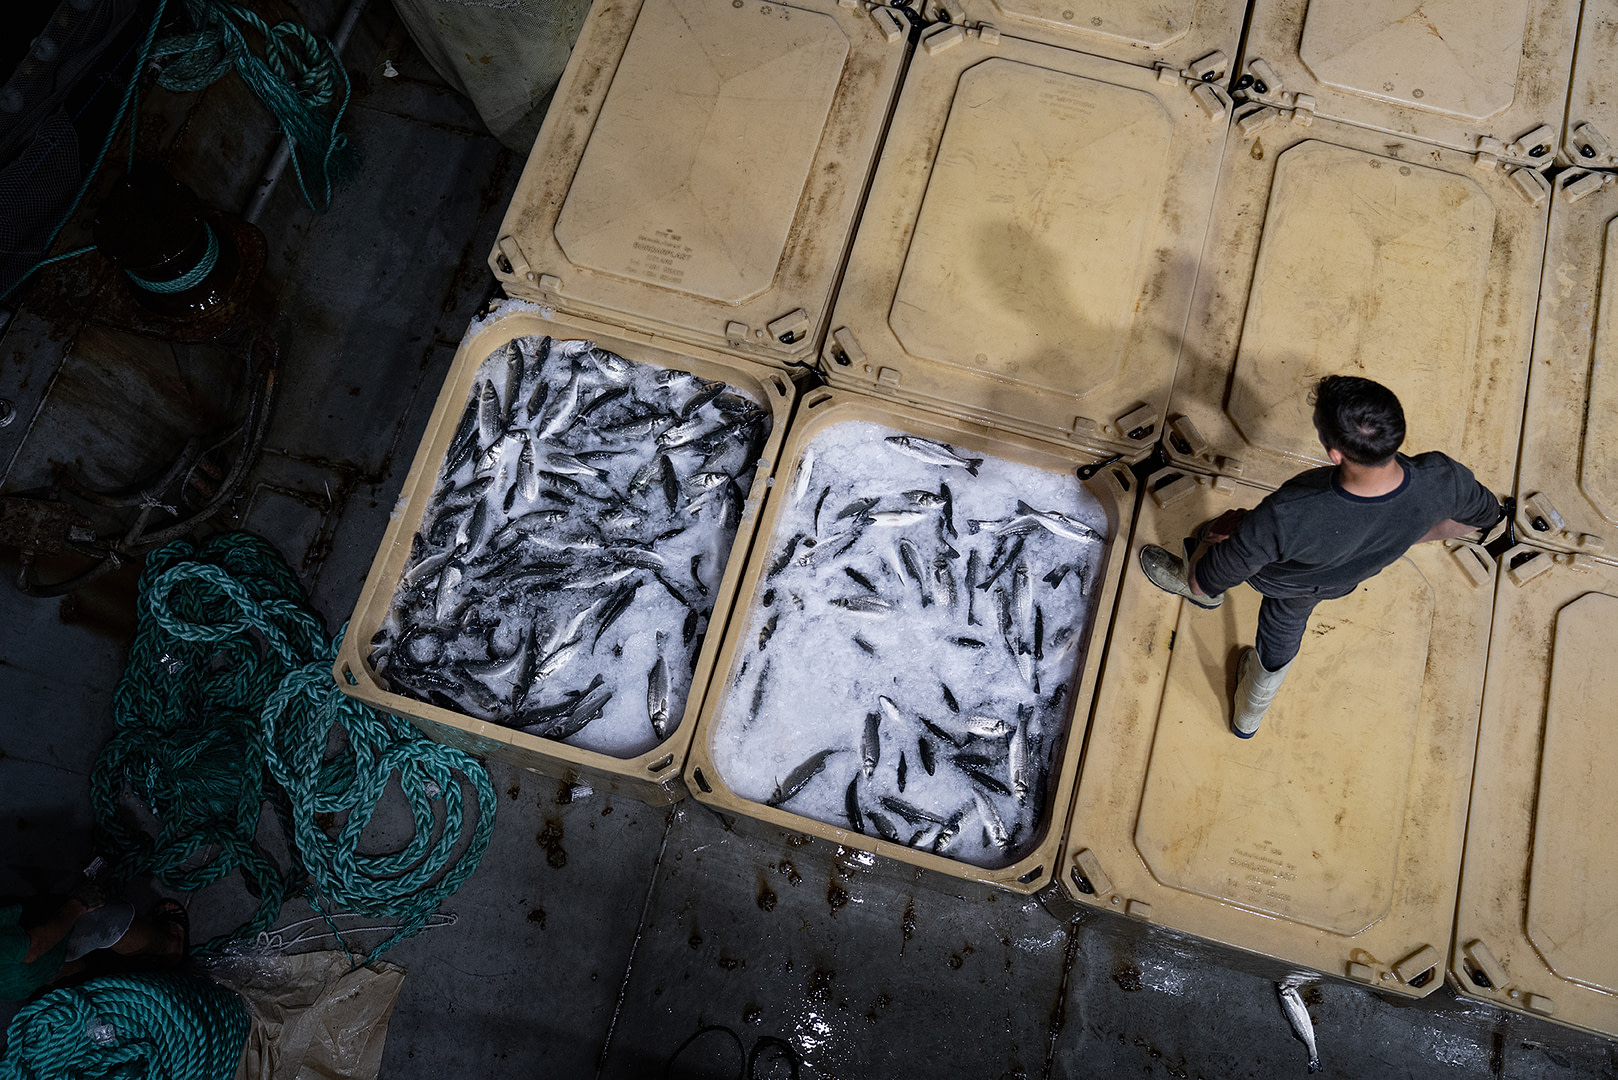 <br />
Sea bass freshly harvested from marine fish farm cages lie packed in water and ice inside large plastic fish boxes as a worker walks above them. The approximately 10 tons of fish from this harvest will be transported to a fish processing facility. Trabzon, Trabzon Province, Black Sea Region, Turkiye, 2023. Havva Zorlu / We Animals Media 